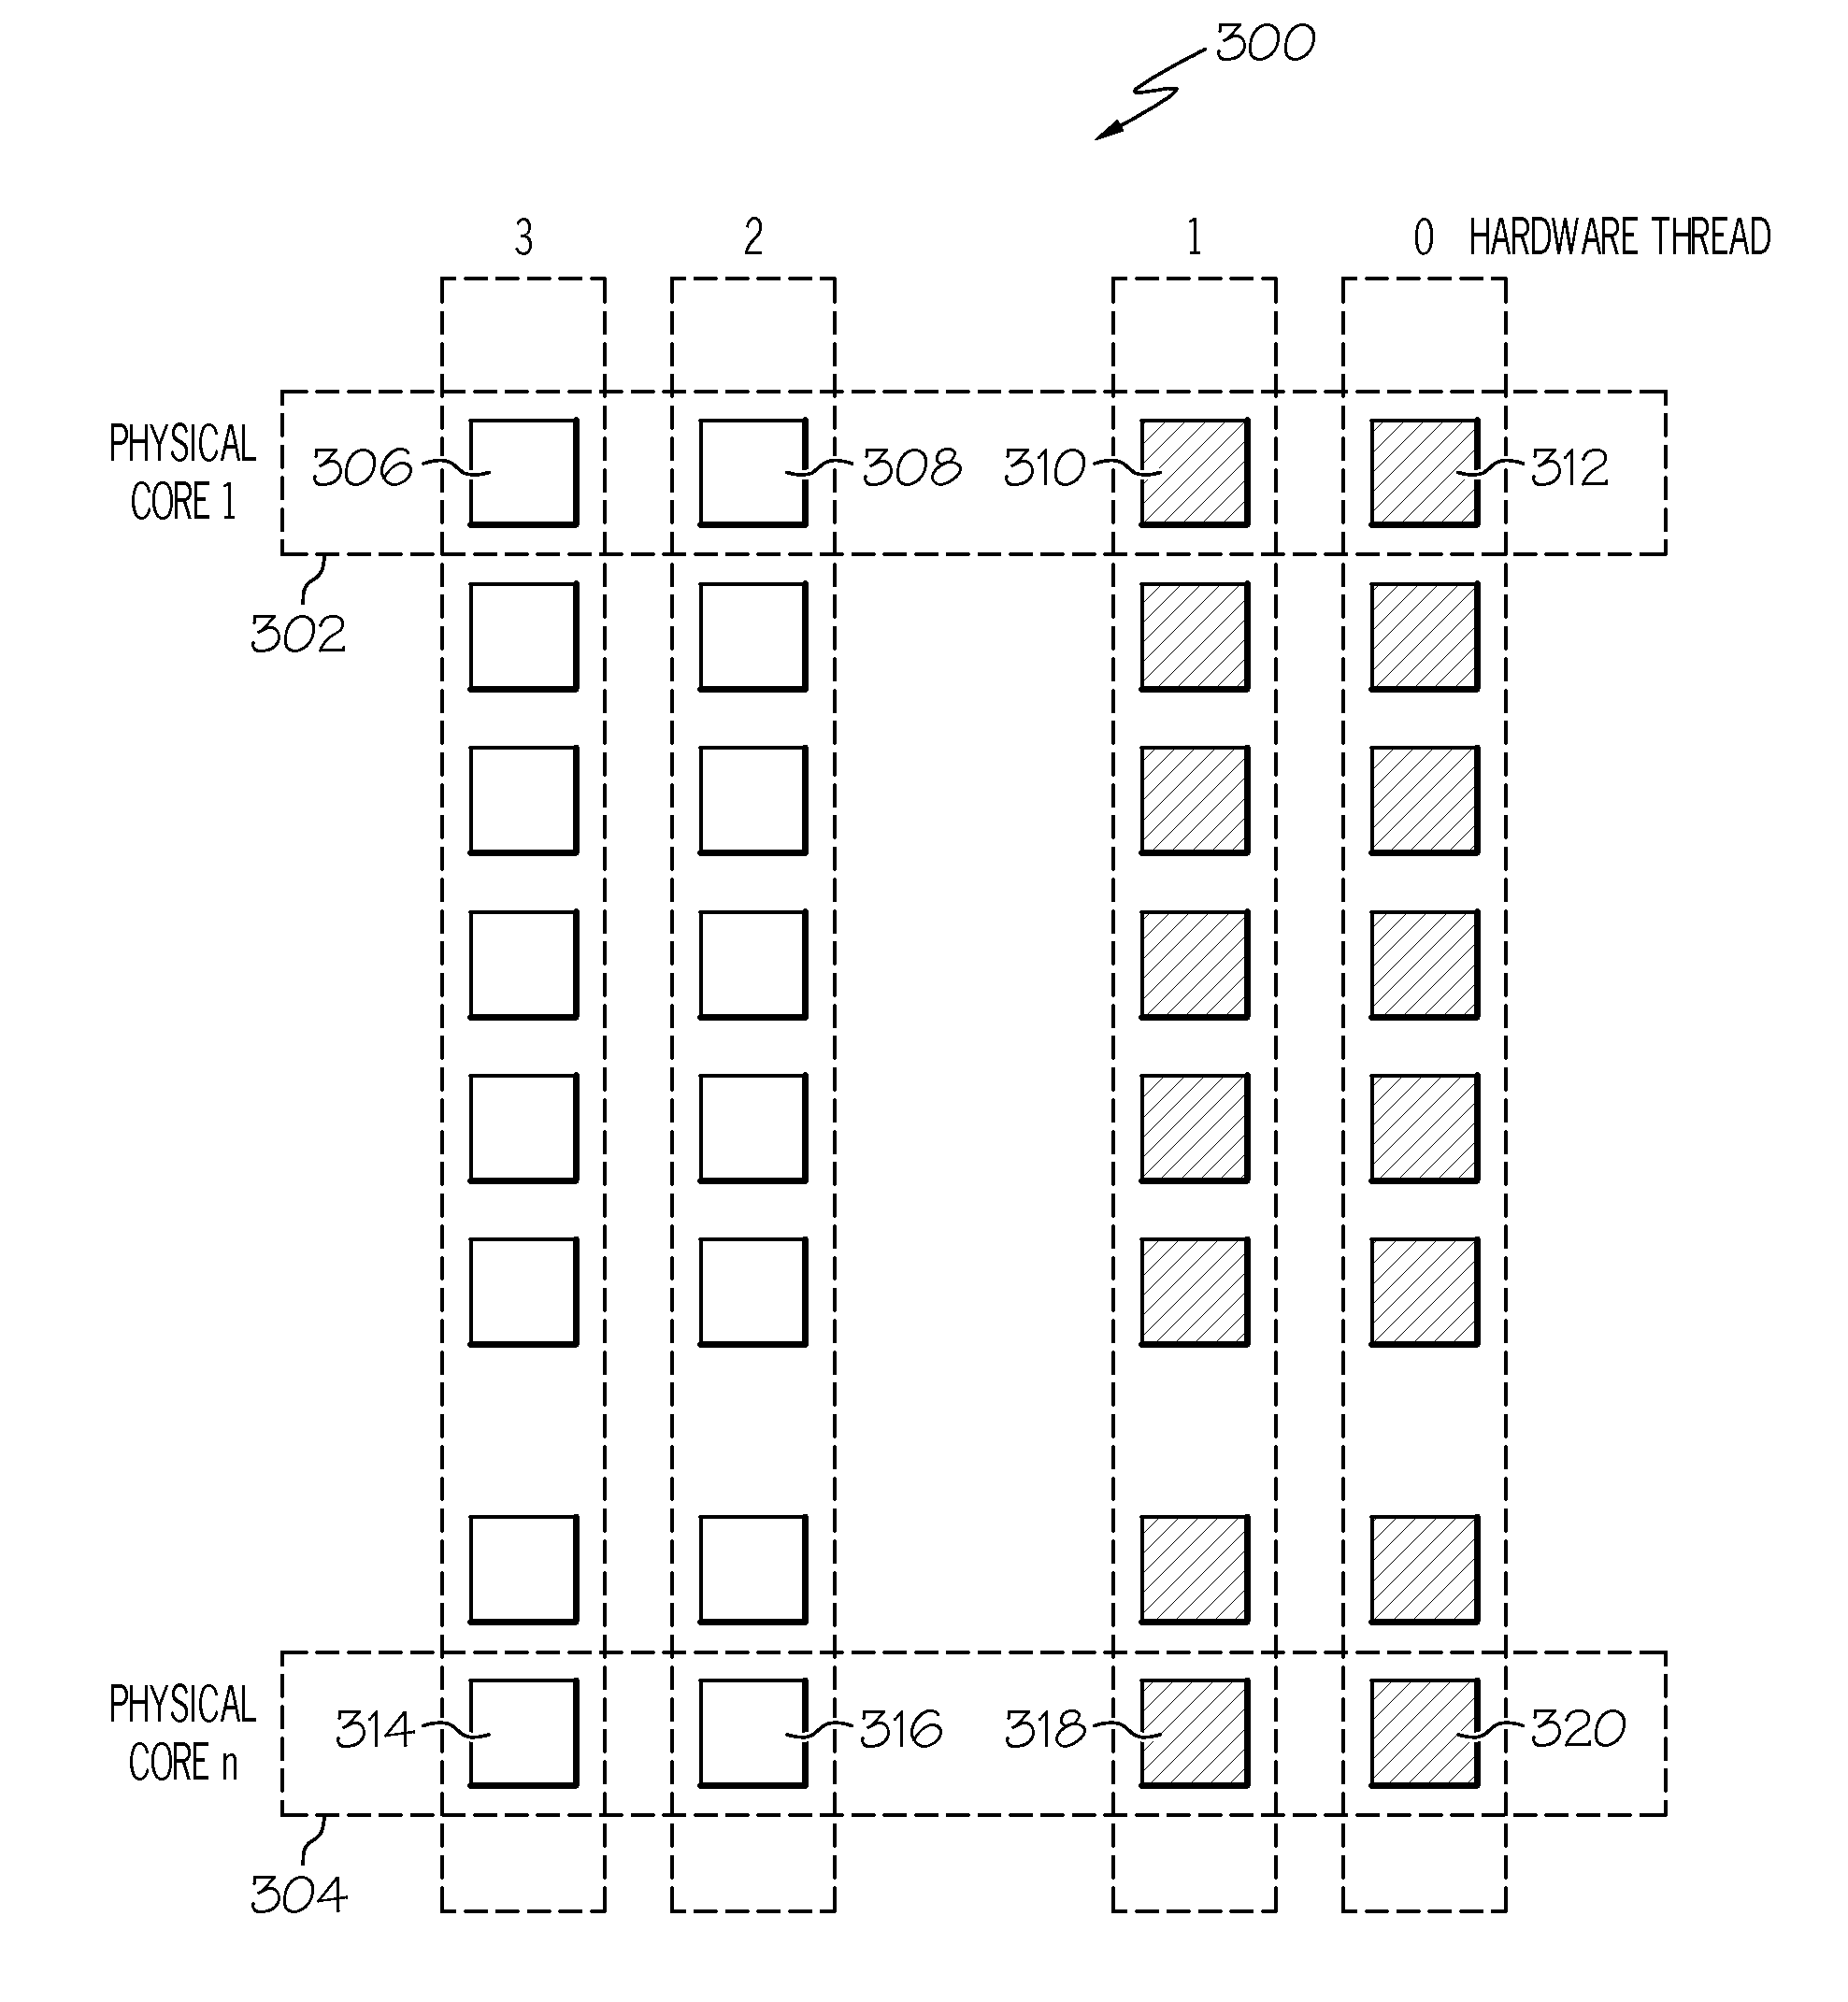 Hardware multi-threading co-scheduling for parallel processing systems